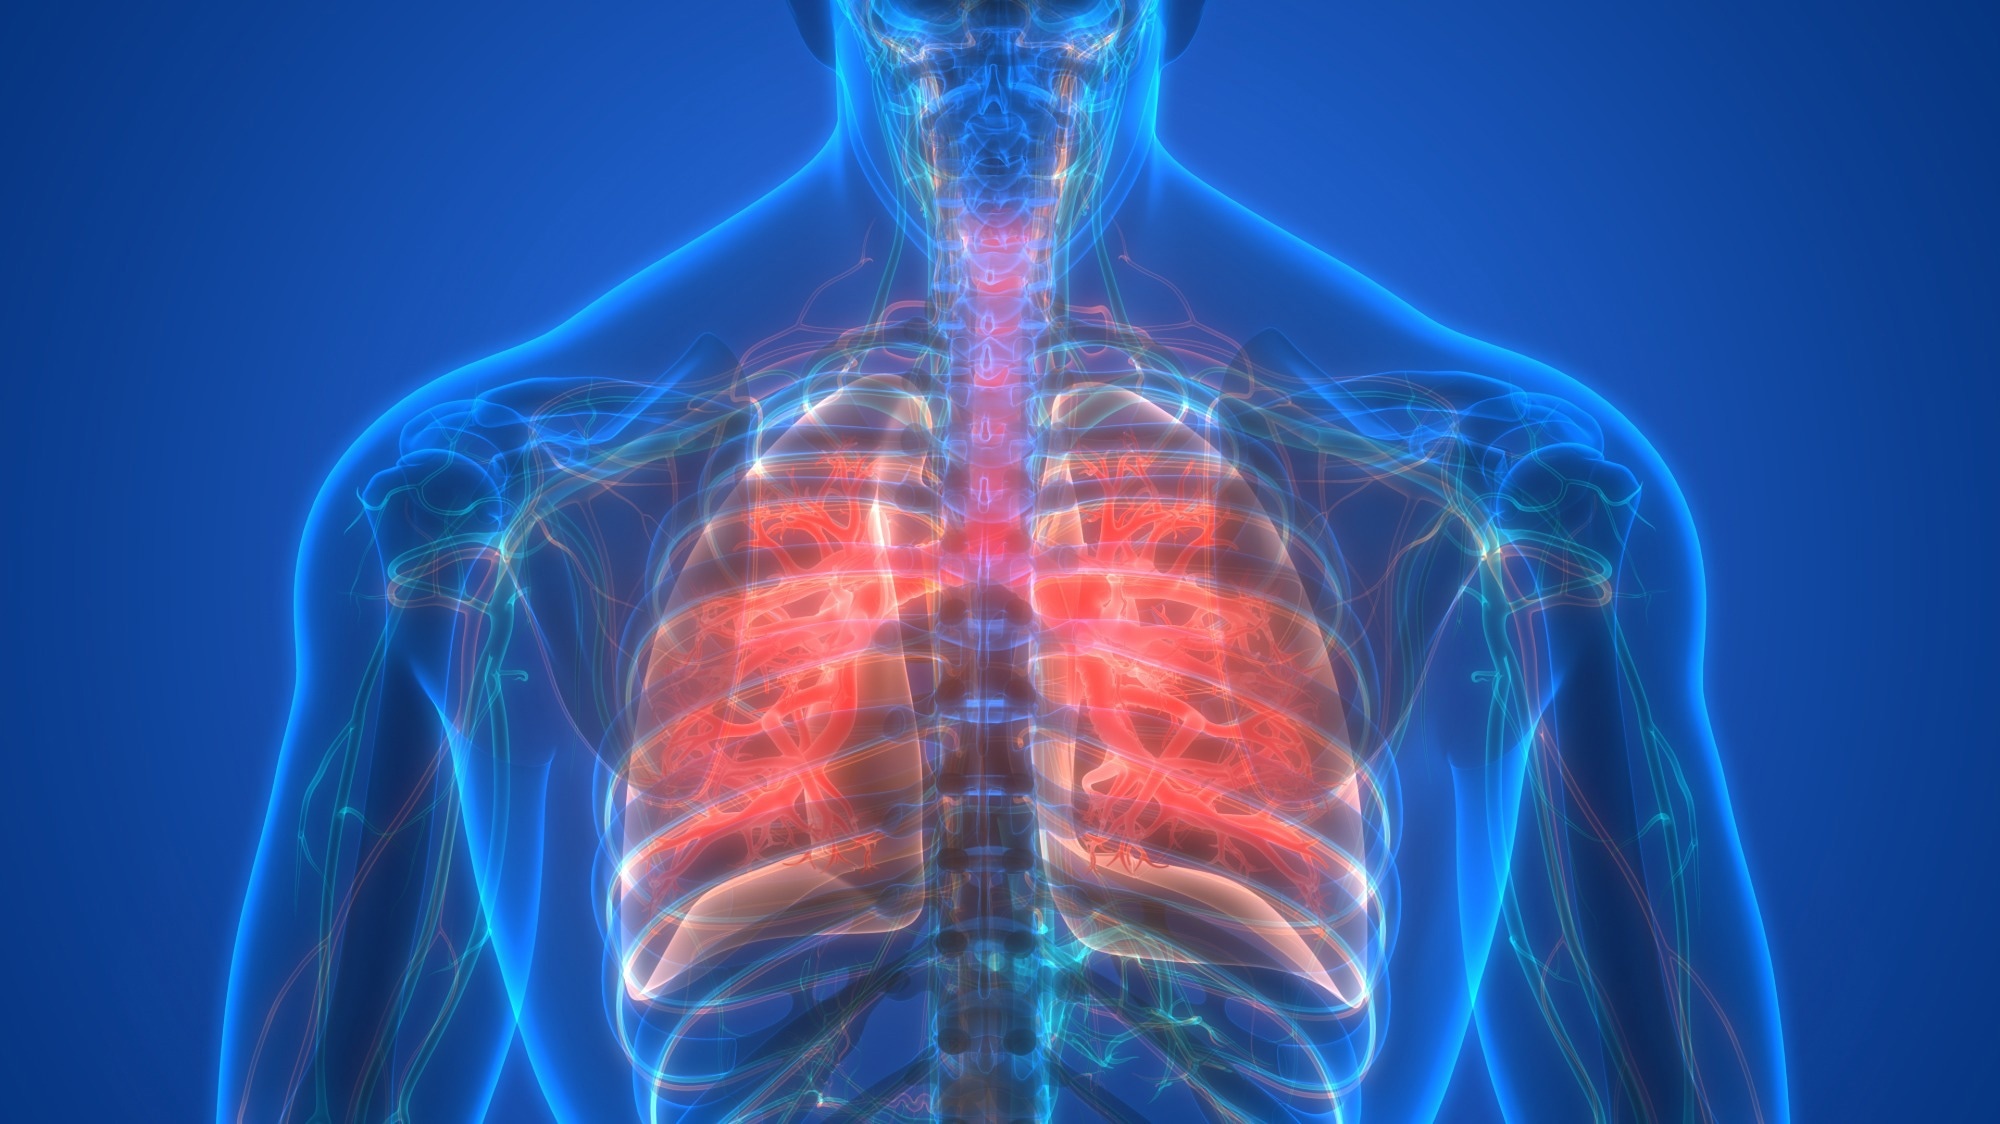 Study: Low Gut Microbial Diversity Augments Estrogen-Driven Pulmonary Fibrosis in Female-Predominant Interstitial Lung Disease. Image Credit: Magic mine/Shutterstock